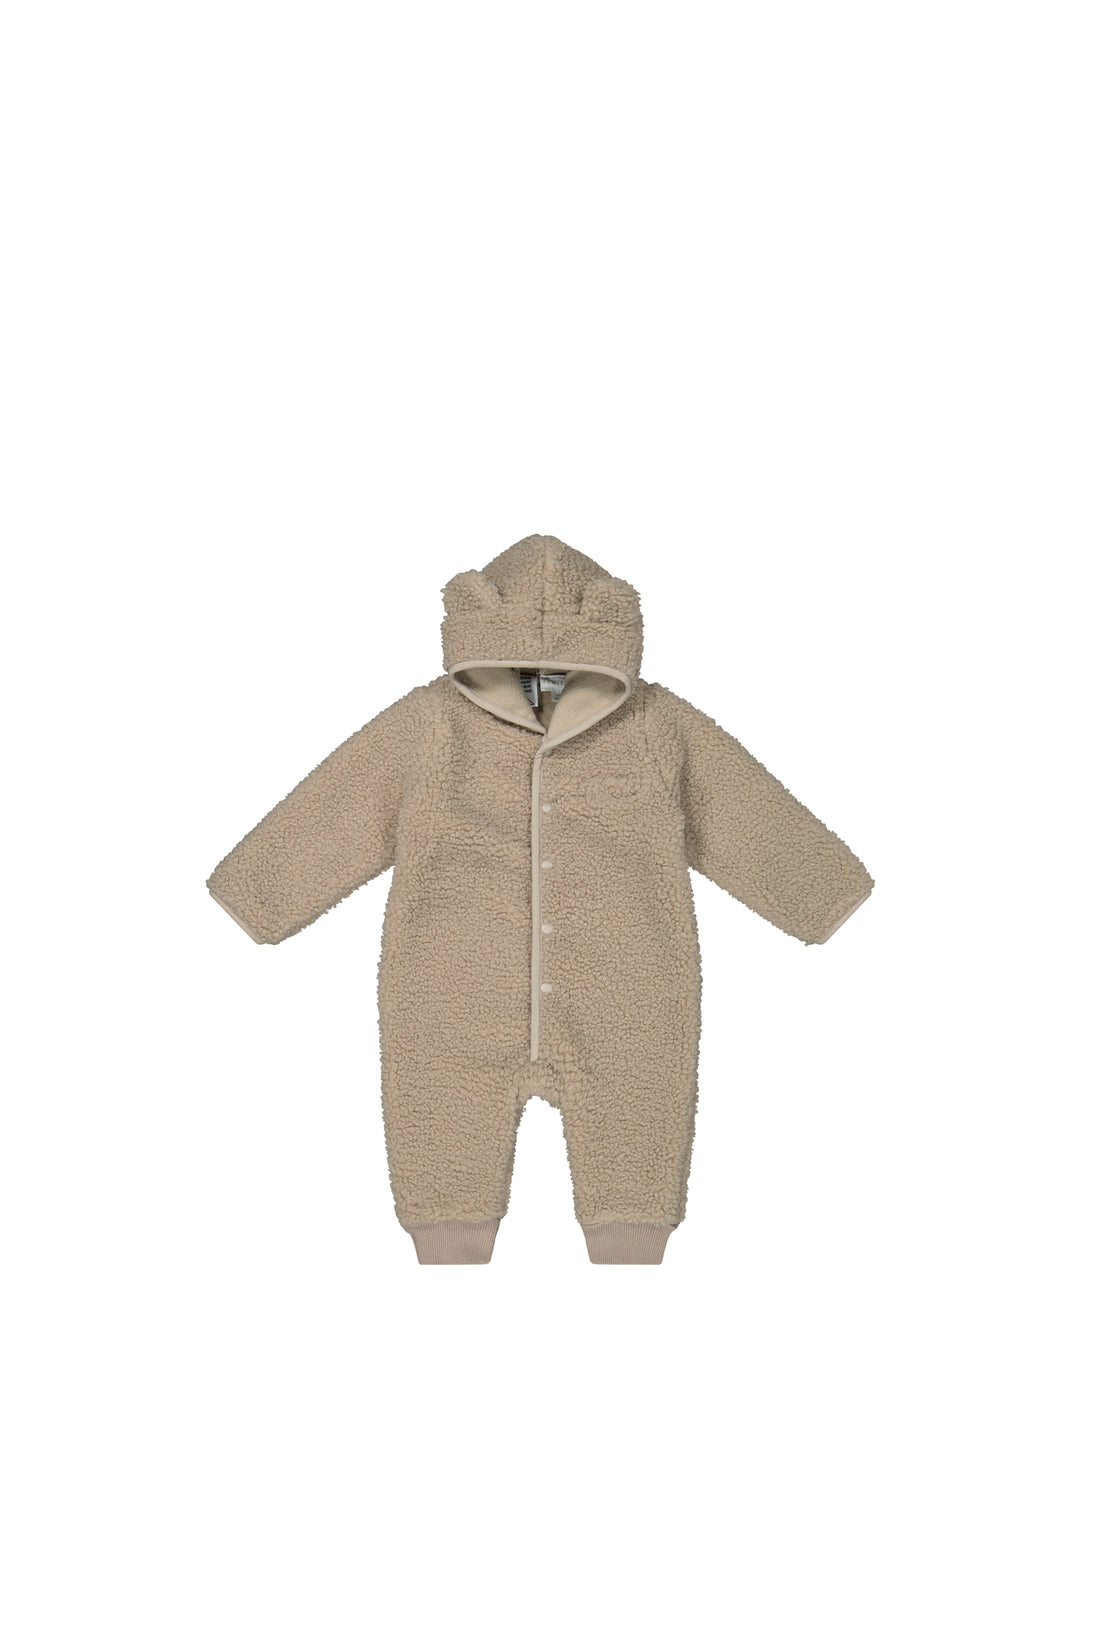 Sasha Recycled Polyester Sherpa Onepiece - Lait Marle